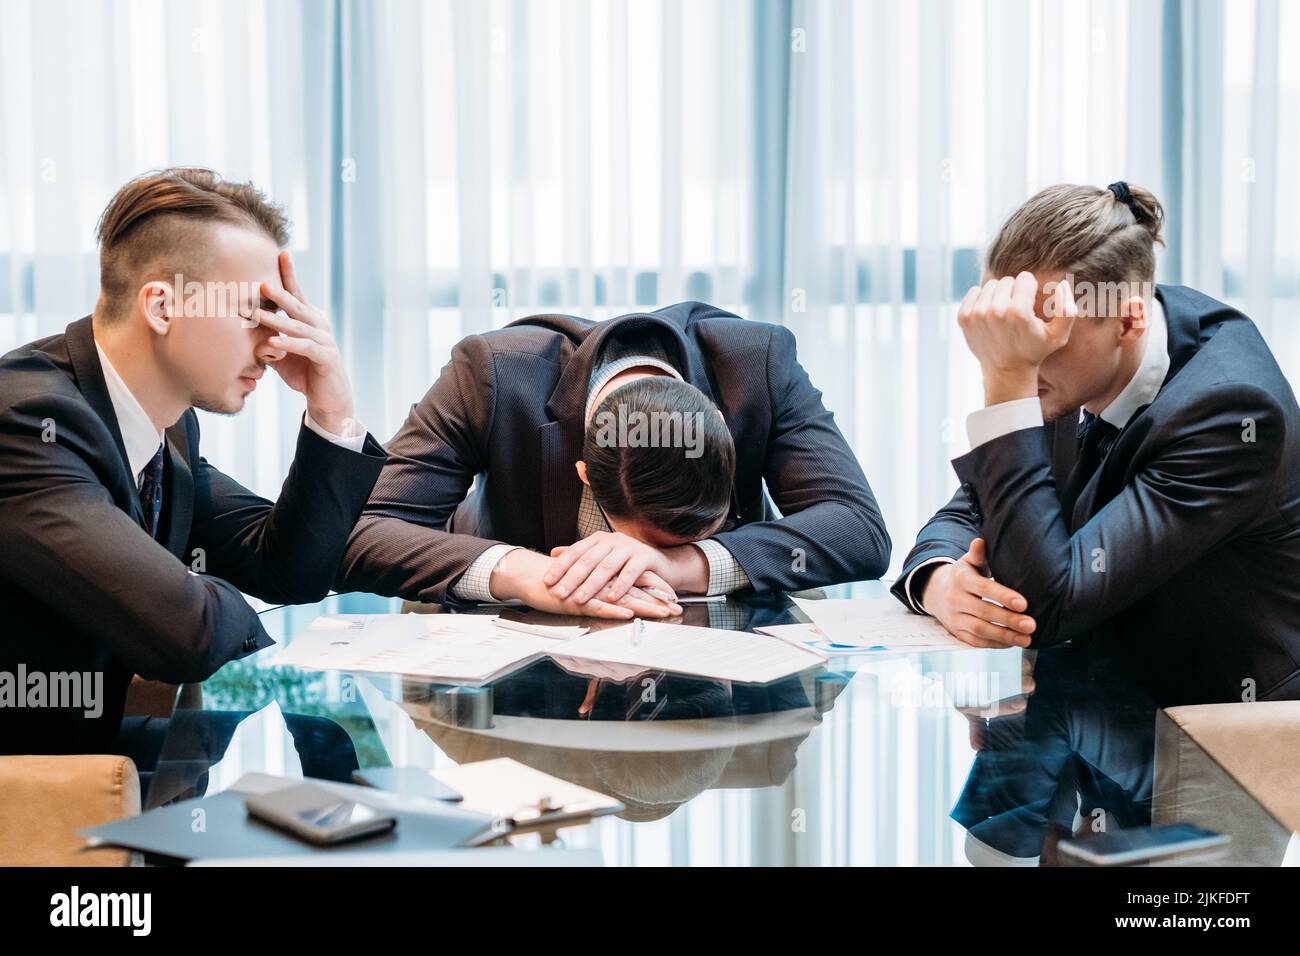 business failure bankruptcy stressed defeated team Stock Photo